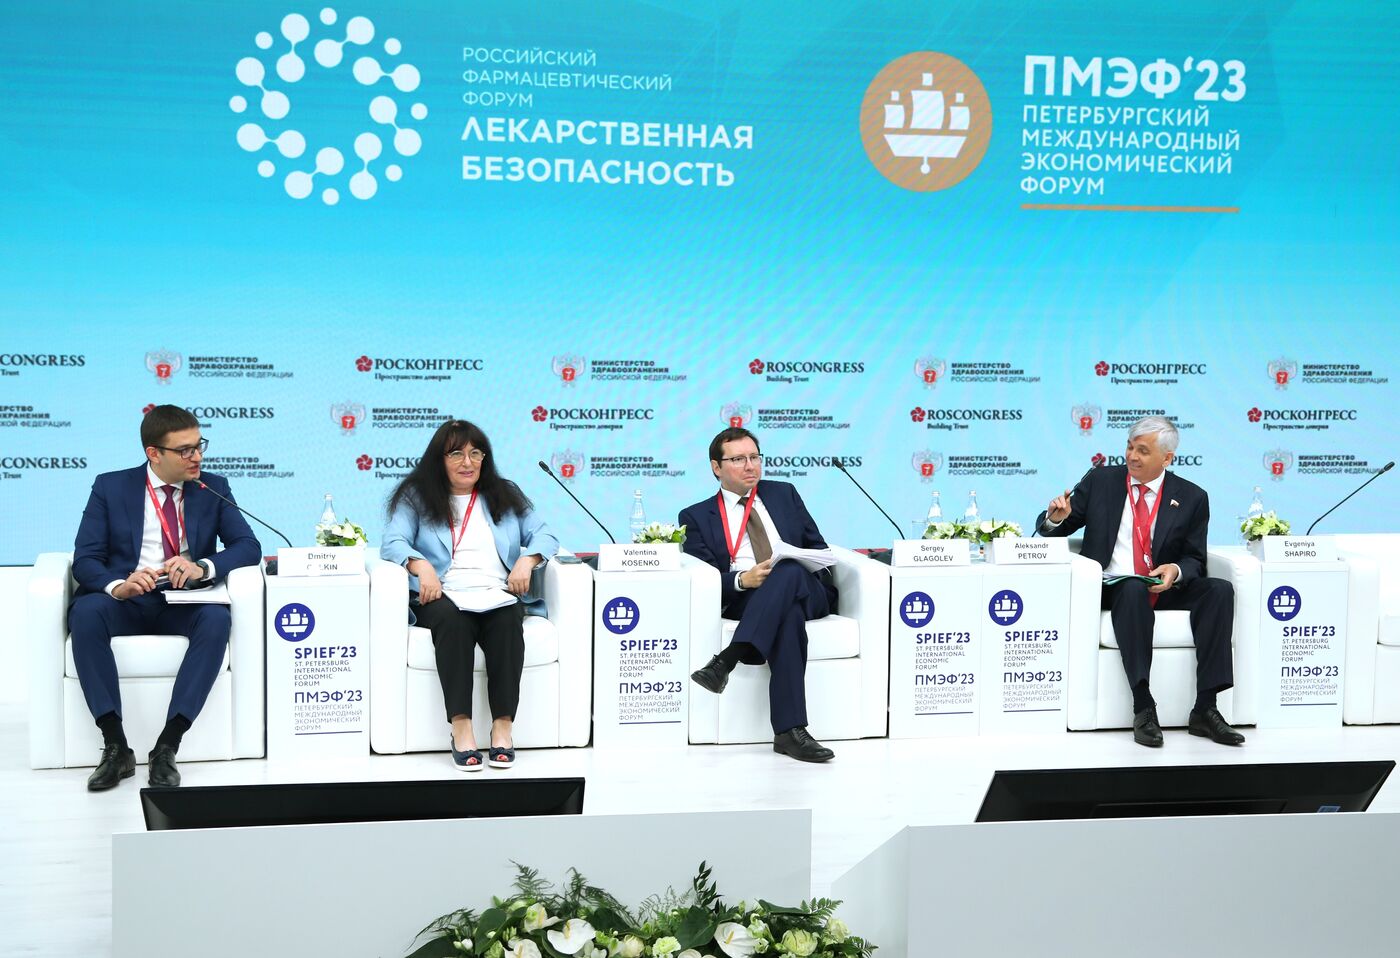 SPIEF-2023. The Regulatory Response to Economic Sanctions: New Mechanisms Vital for Future Development of the Pharmaceutical Industry